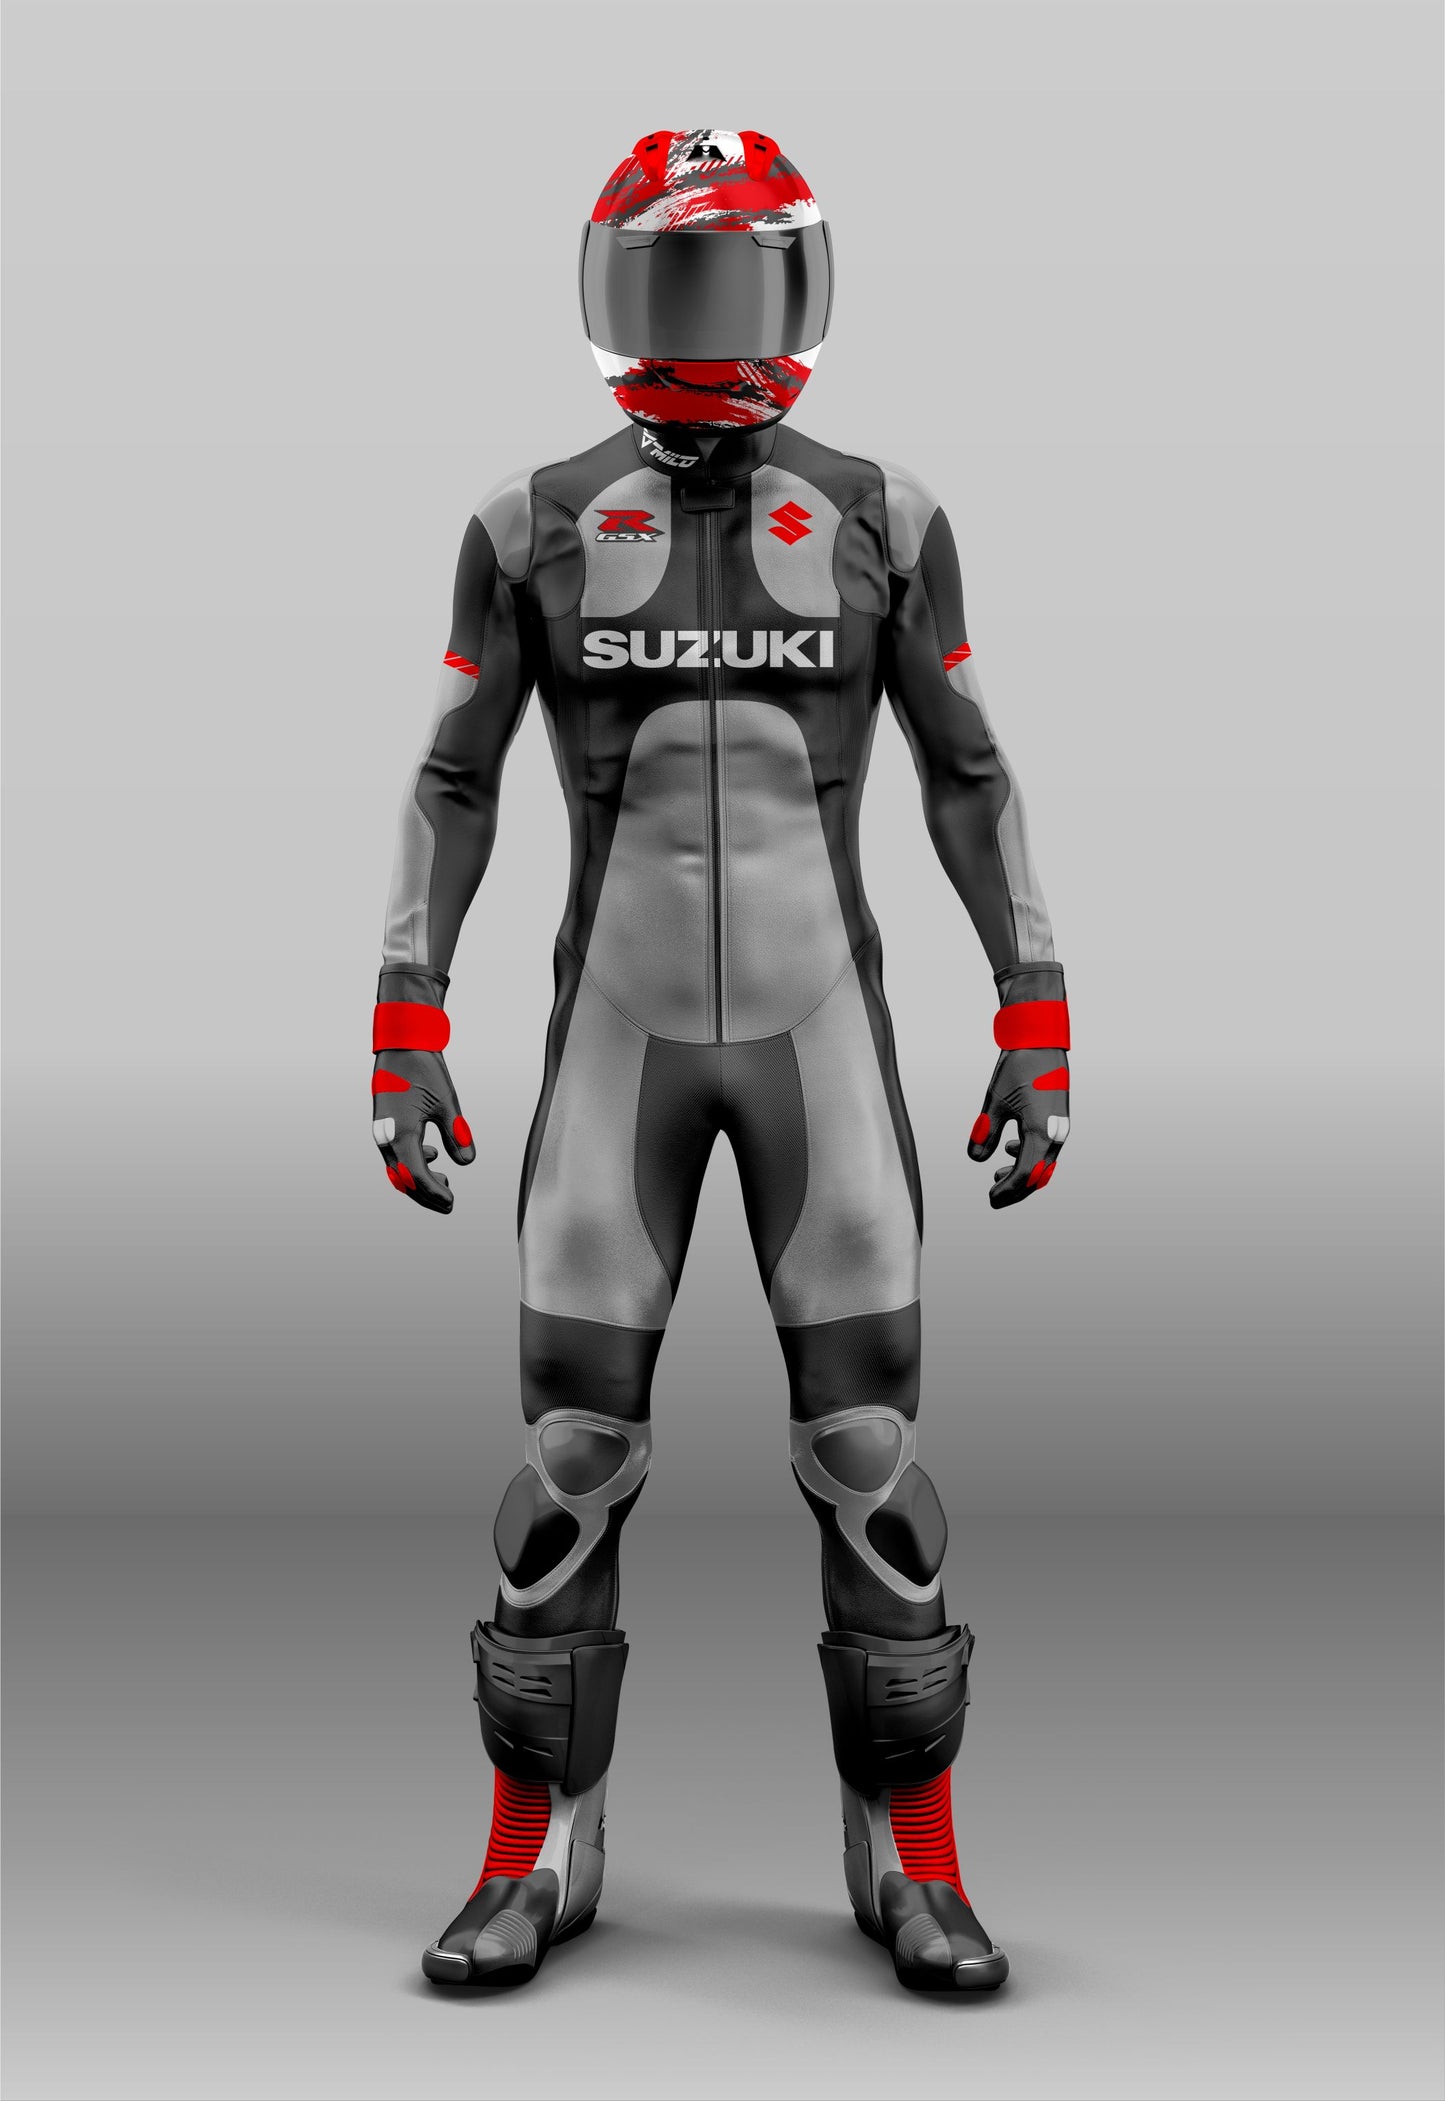 Unleash Your Suzuki's Potential with the Best Motorcycle Suits - Top Brands and Models Reviewed  Conquer the Track with the Best Gear and Performance Features.